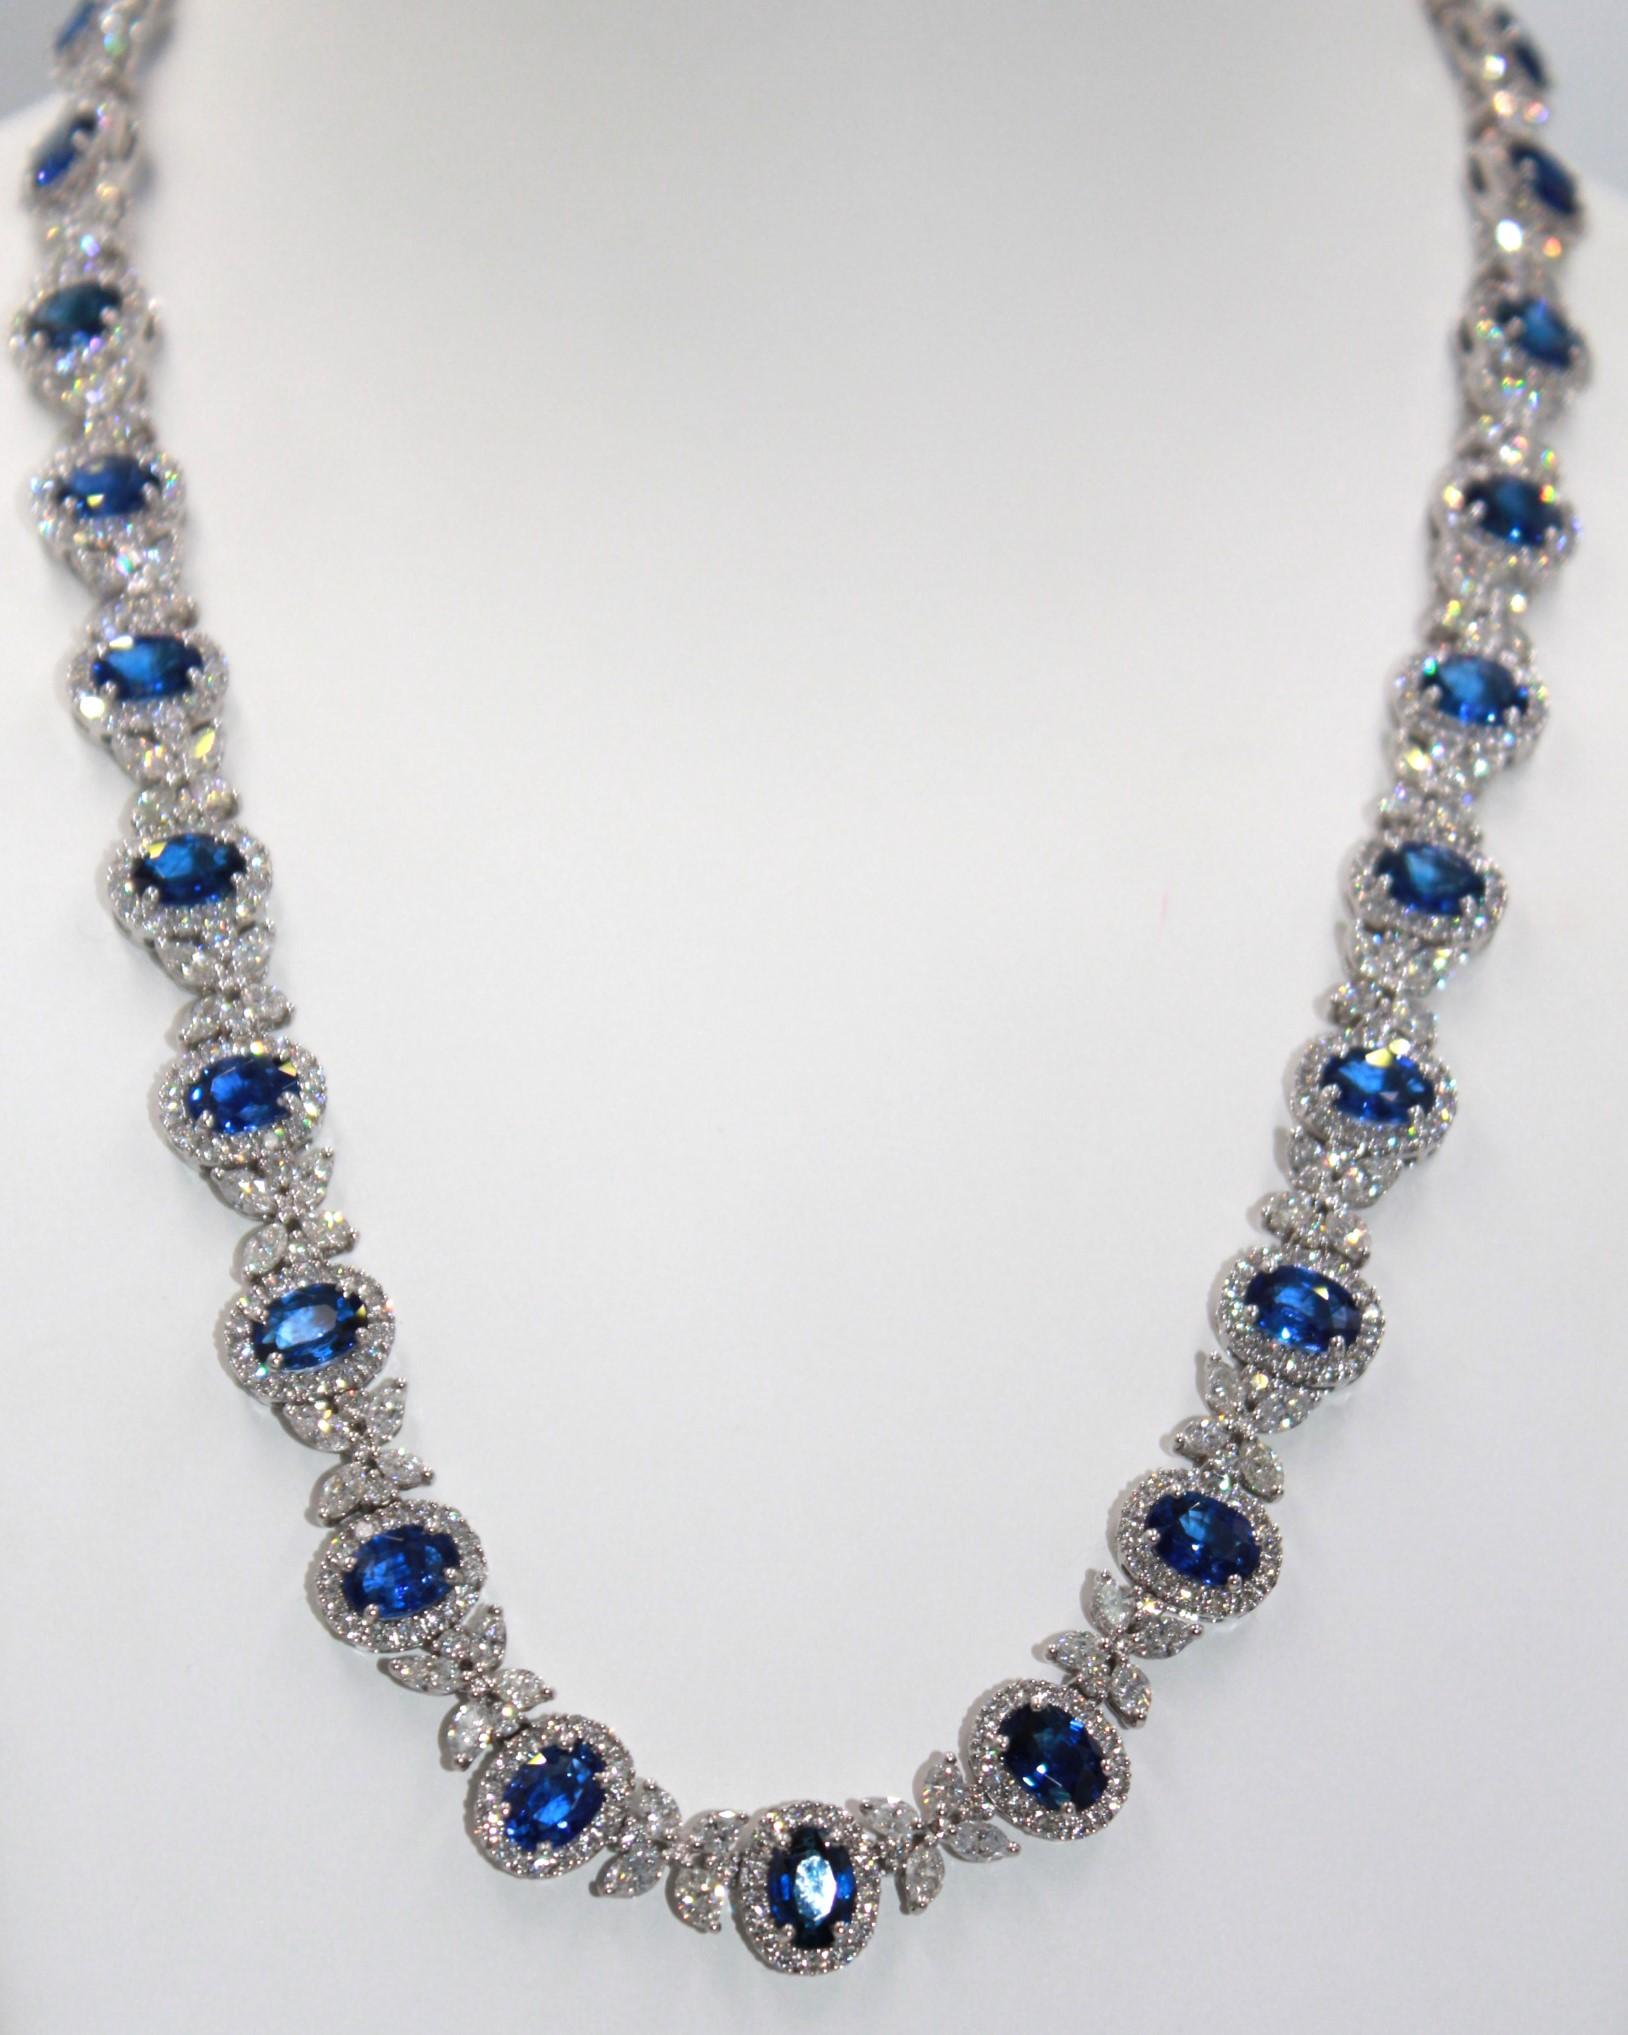 25.73 carats oval shaped Ceylon Sapphire with 112 marquise shaped and 448 round diamonds, totaling a diamond weight of 16.59 carats. 

This stunning Sapphire & Diamond Necklace will highlight your uniqueness and elegance. 

Item Details:
- Type: